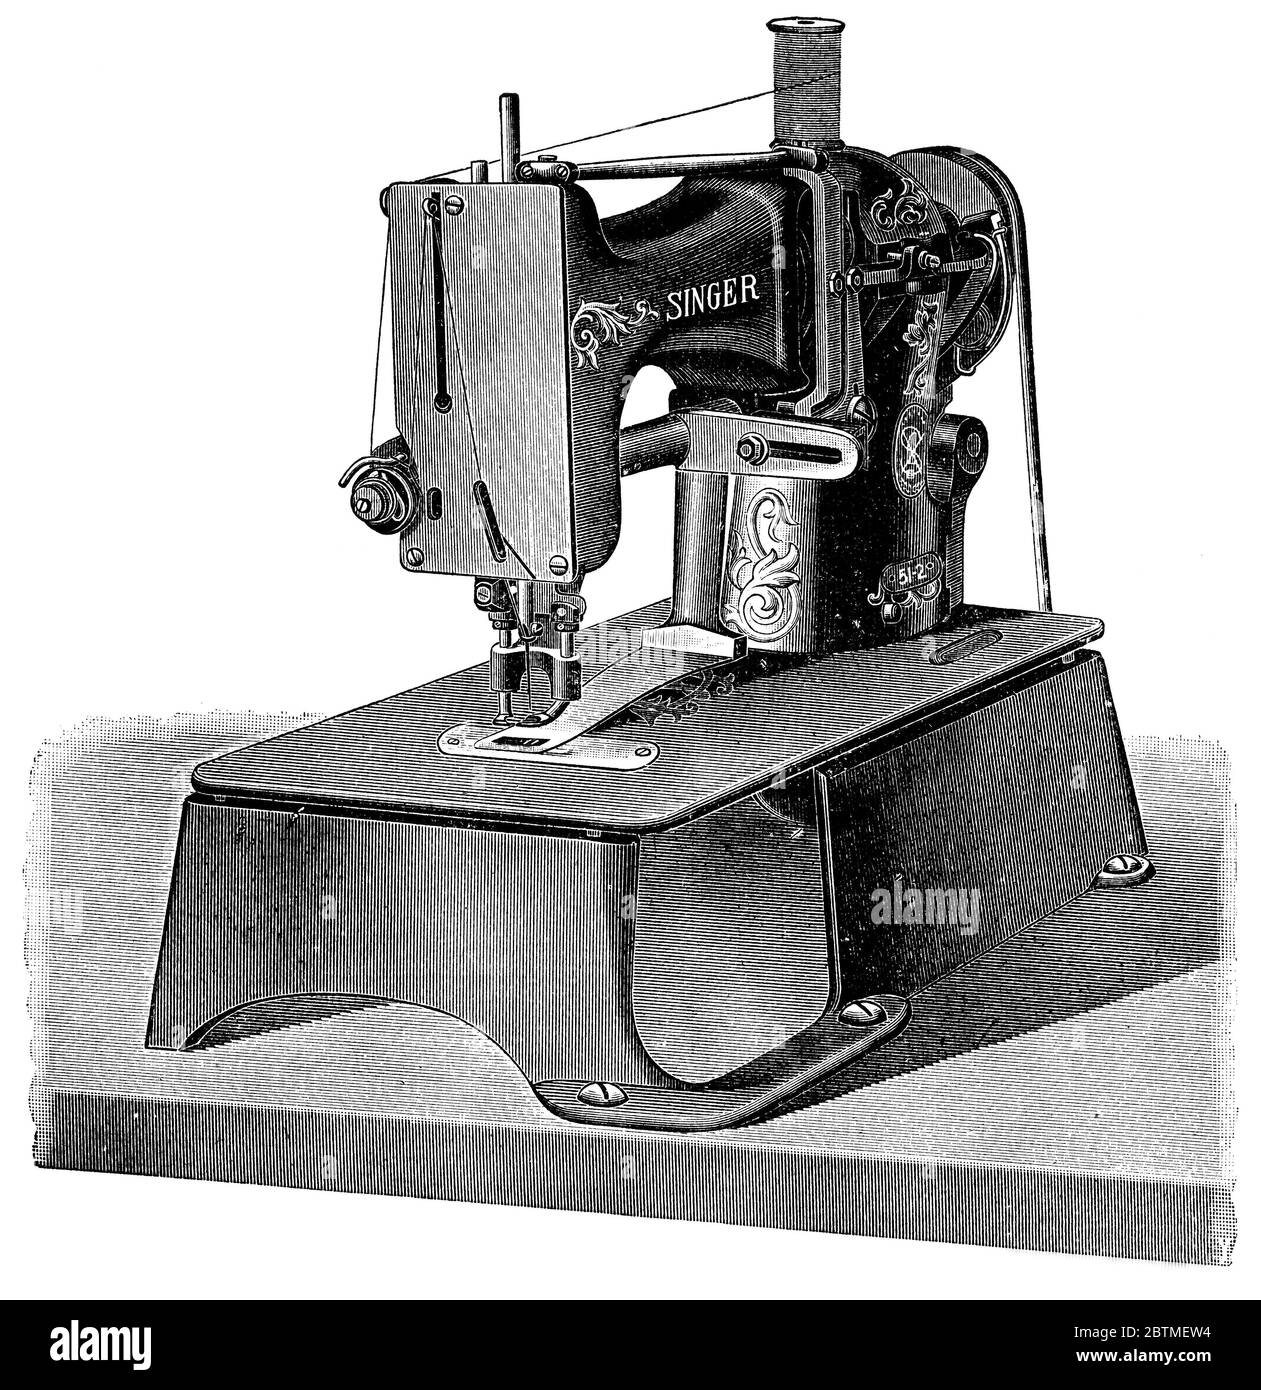 Bar tack sewing machine by Singer. Illustration of the 19th century. White background. Stock Photo